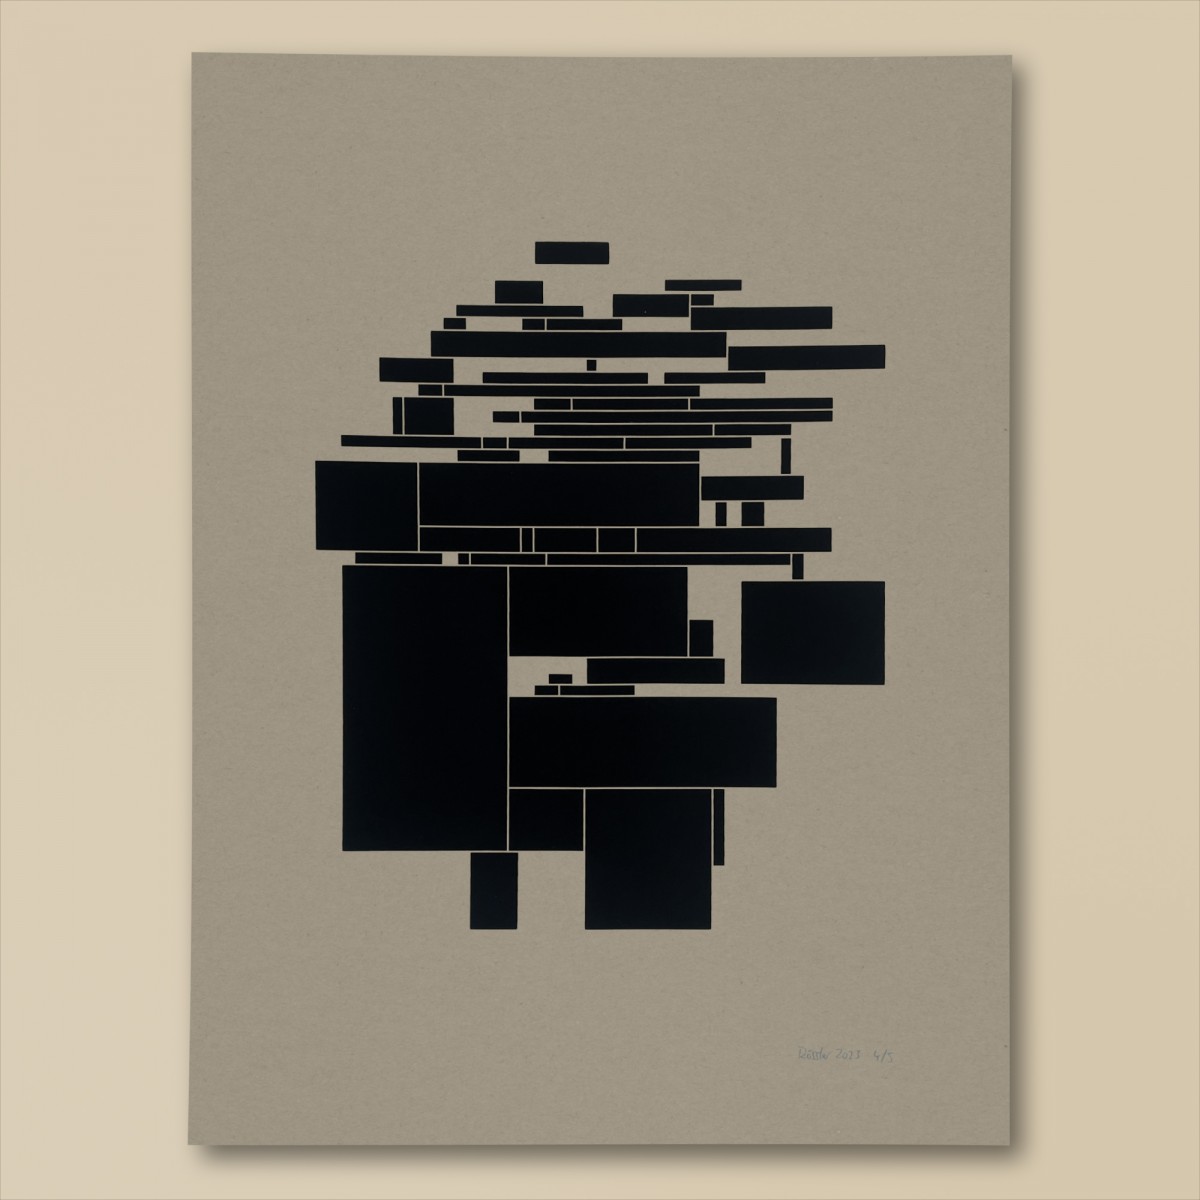 Print now - Riot later ● Off the grid VII - Siebdruck